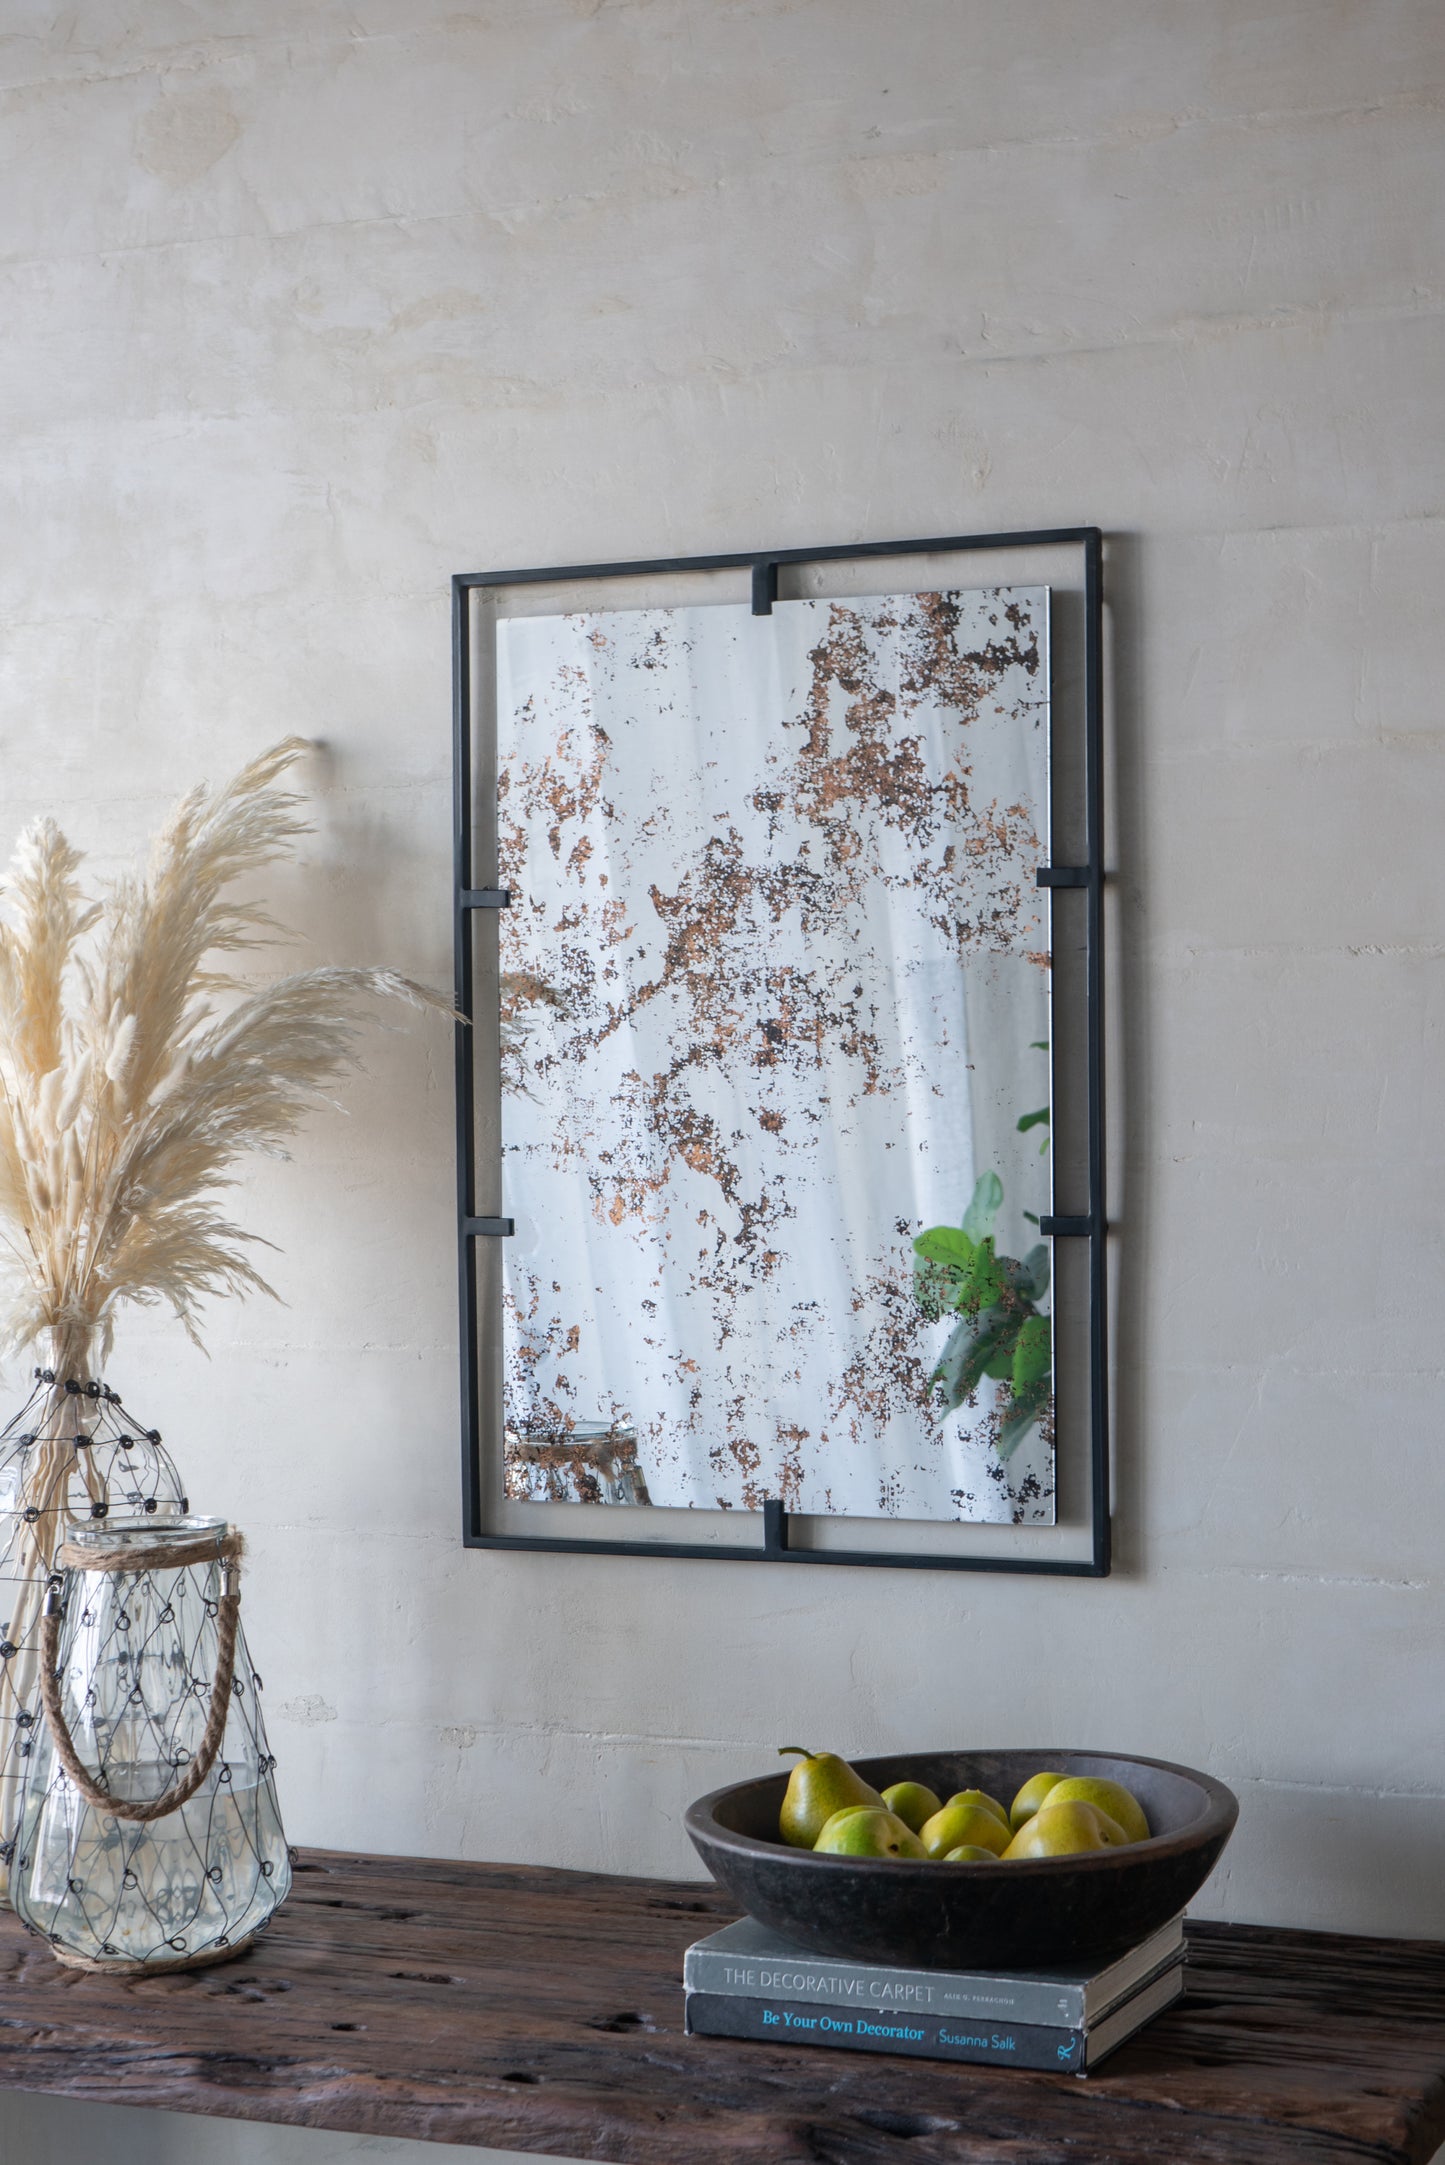 32" x 22" Rectangle Antiqued Wall Mirror